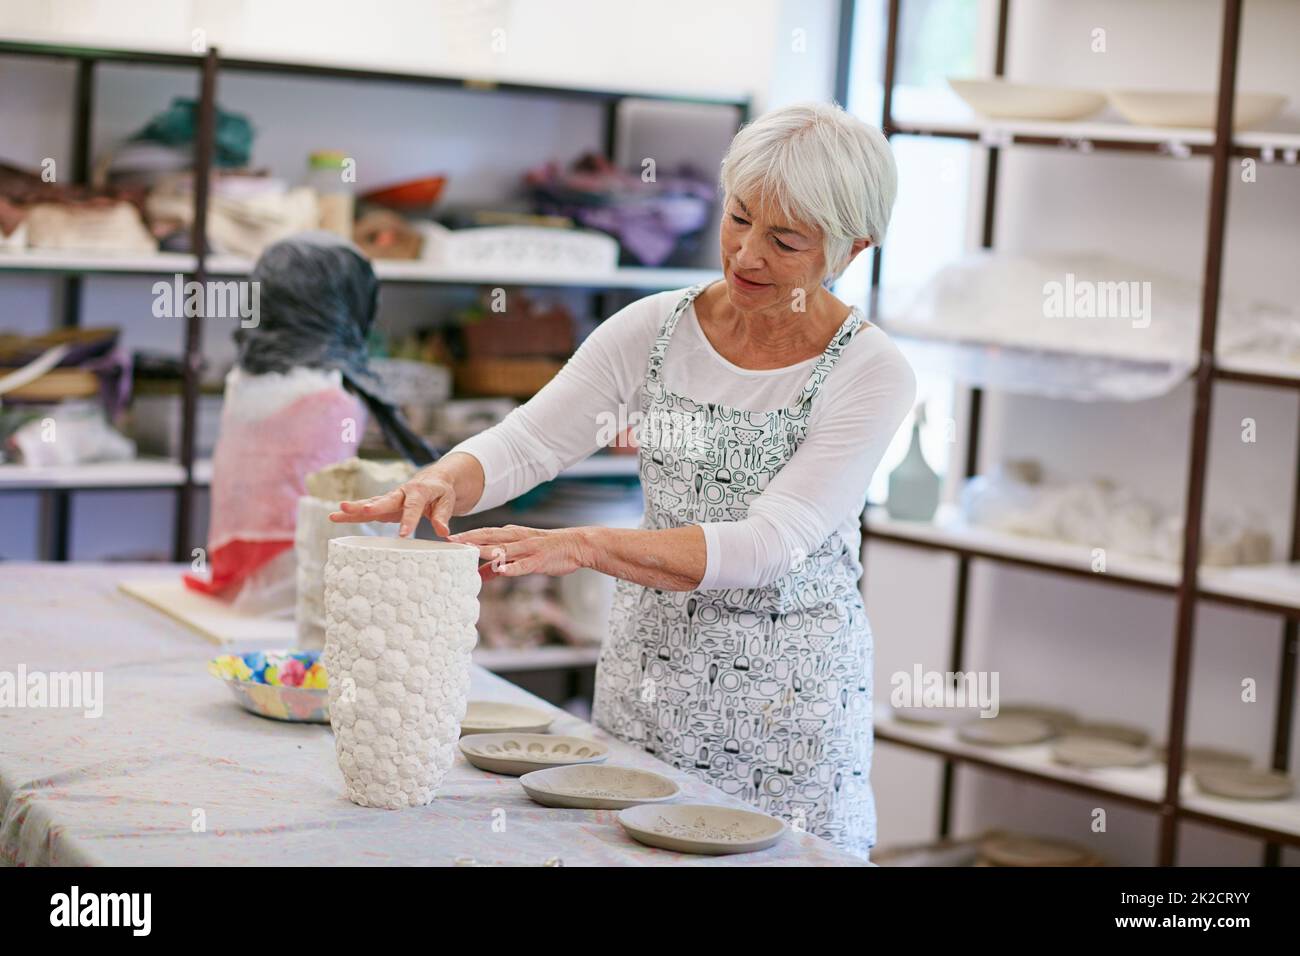 Creativity is timeless. Shot of a senior woman making a ceramic pot in a workshop. Stock Photo